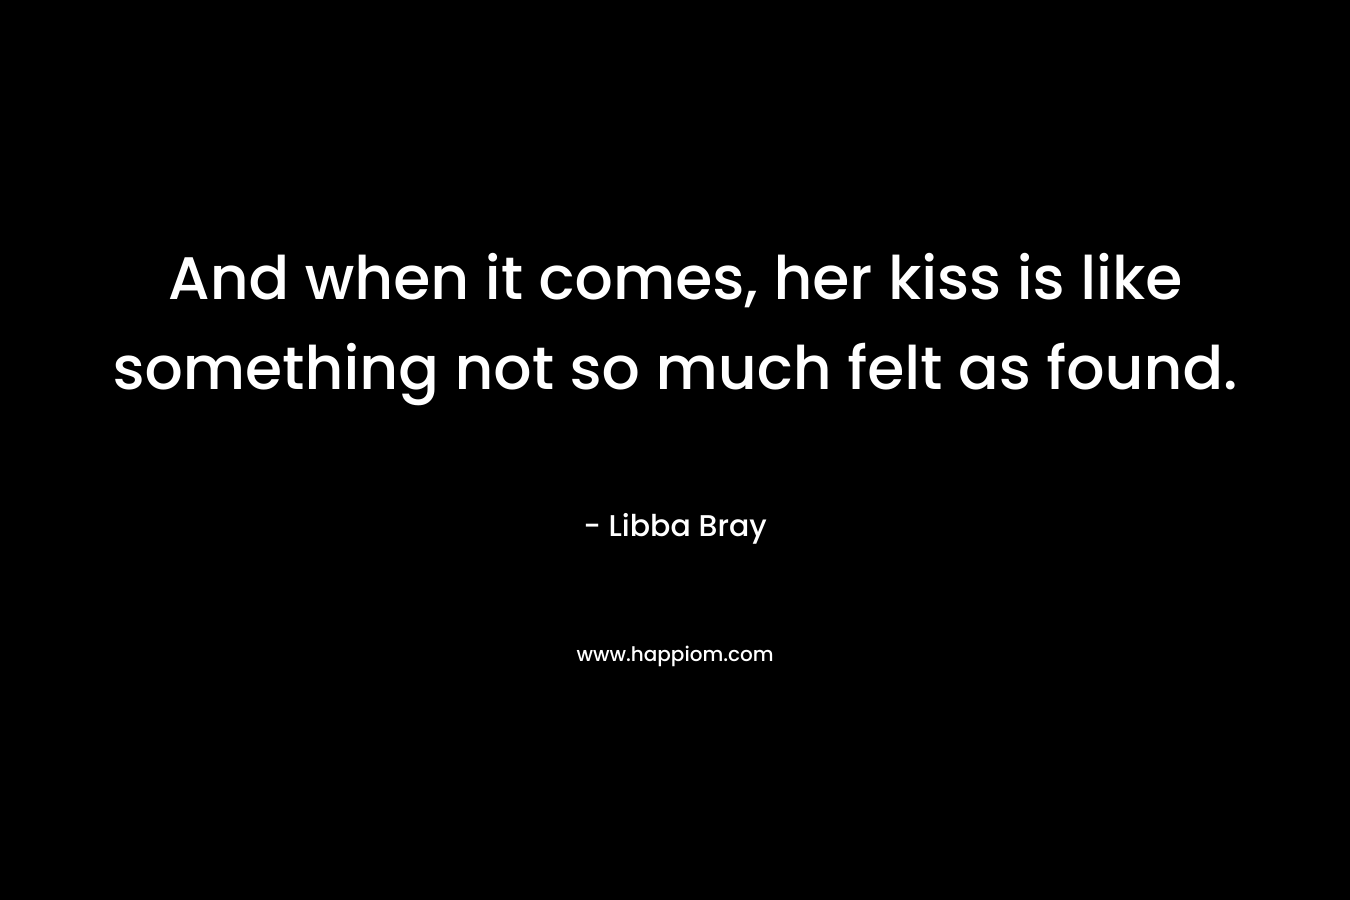 And when it comes, her kiss is like something not so much felt as found. – Libba Bray